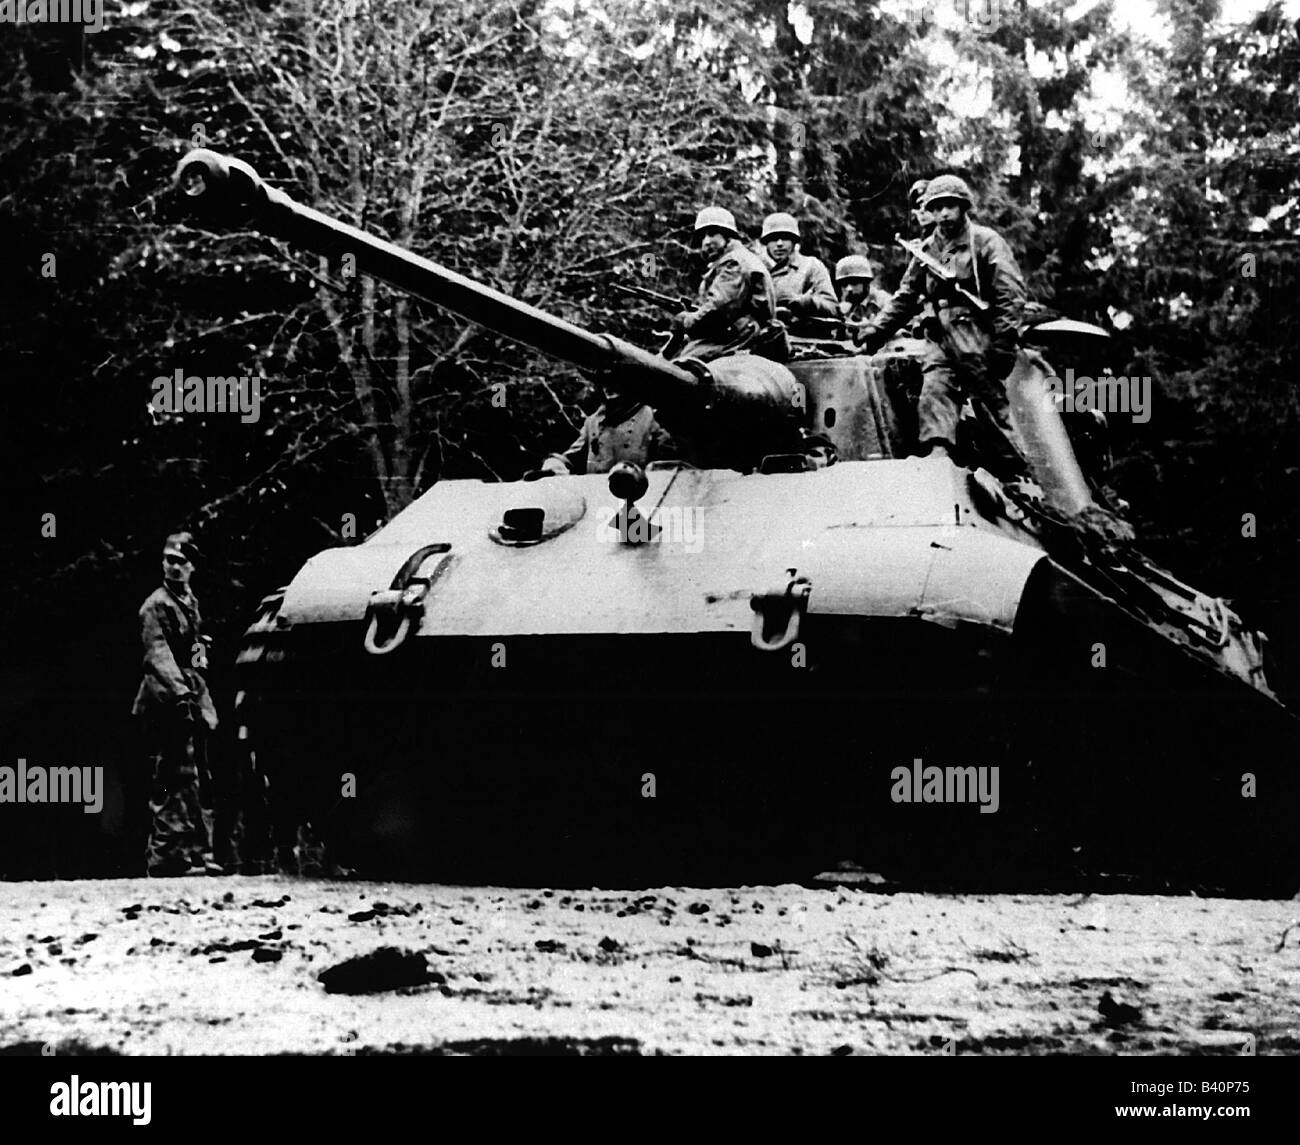 events, Second World War / WWII, Belgium, Battle of the Bulge, German advance 16.-27.12.1944, German paratroopers on a 'King Tiger', 17.12.1944, Stock Photo